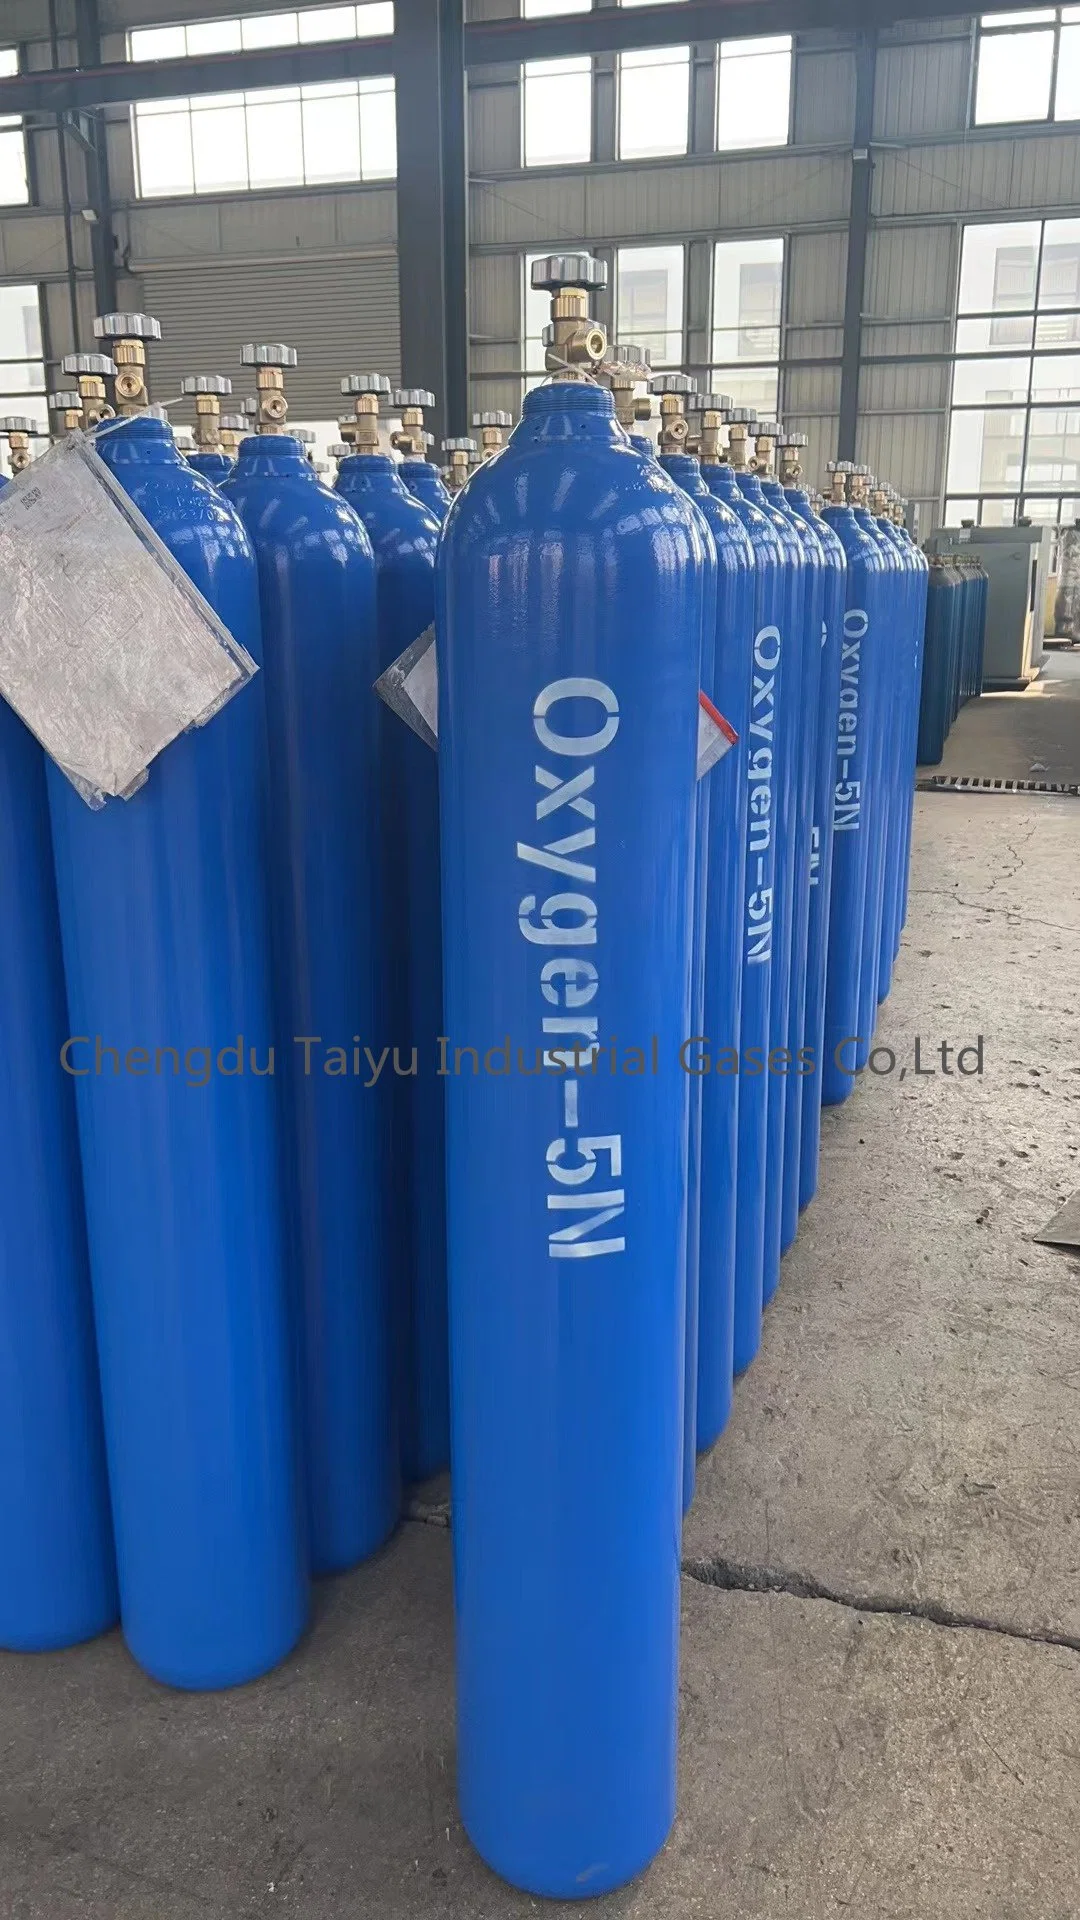 Spot Goods Rare Gas 50L 200bar 99.999% Oxygen Gas with Competitive Price